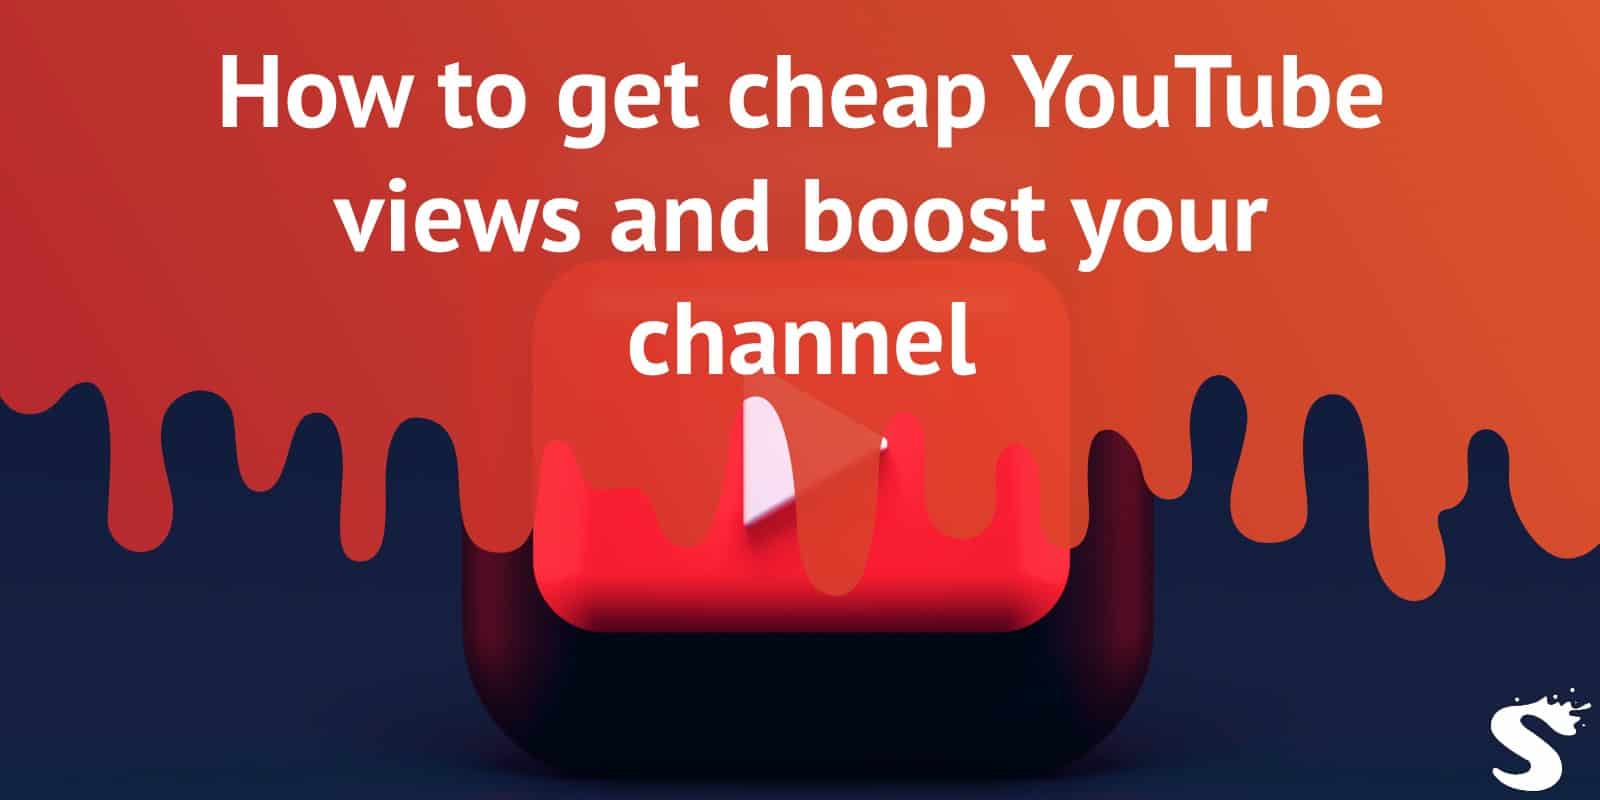 How to get cheap YouTube views and boost your channel